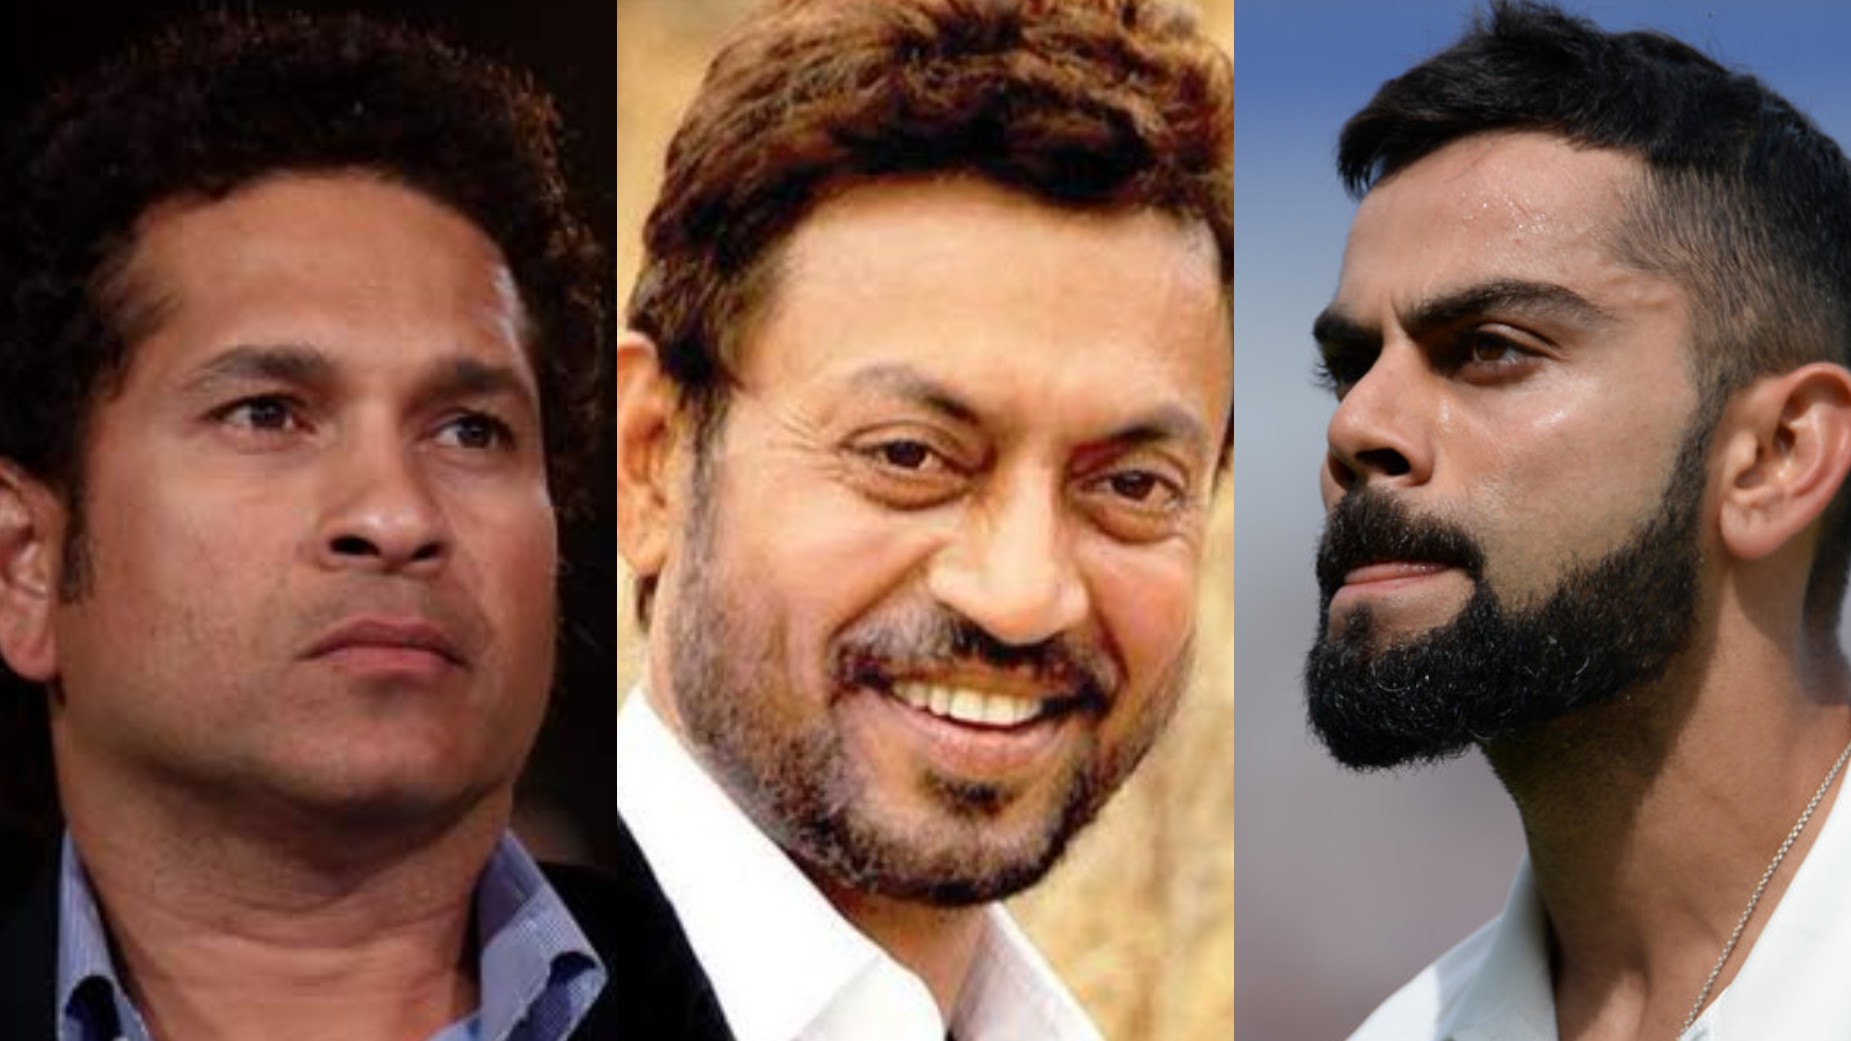 Indian cricketers pay respects to actor Irrfan Khan, who passed away at 53